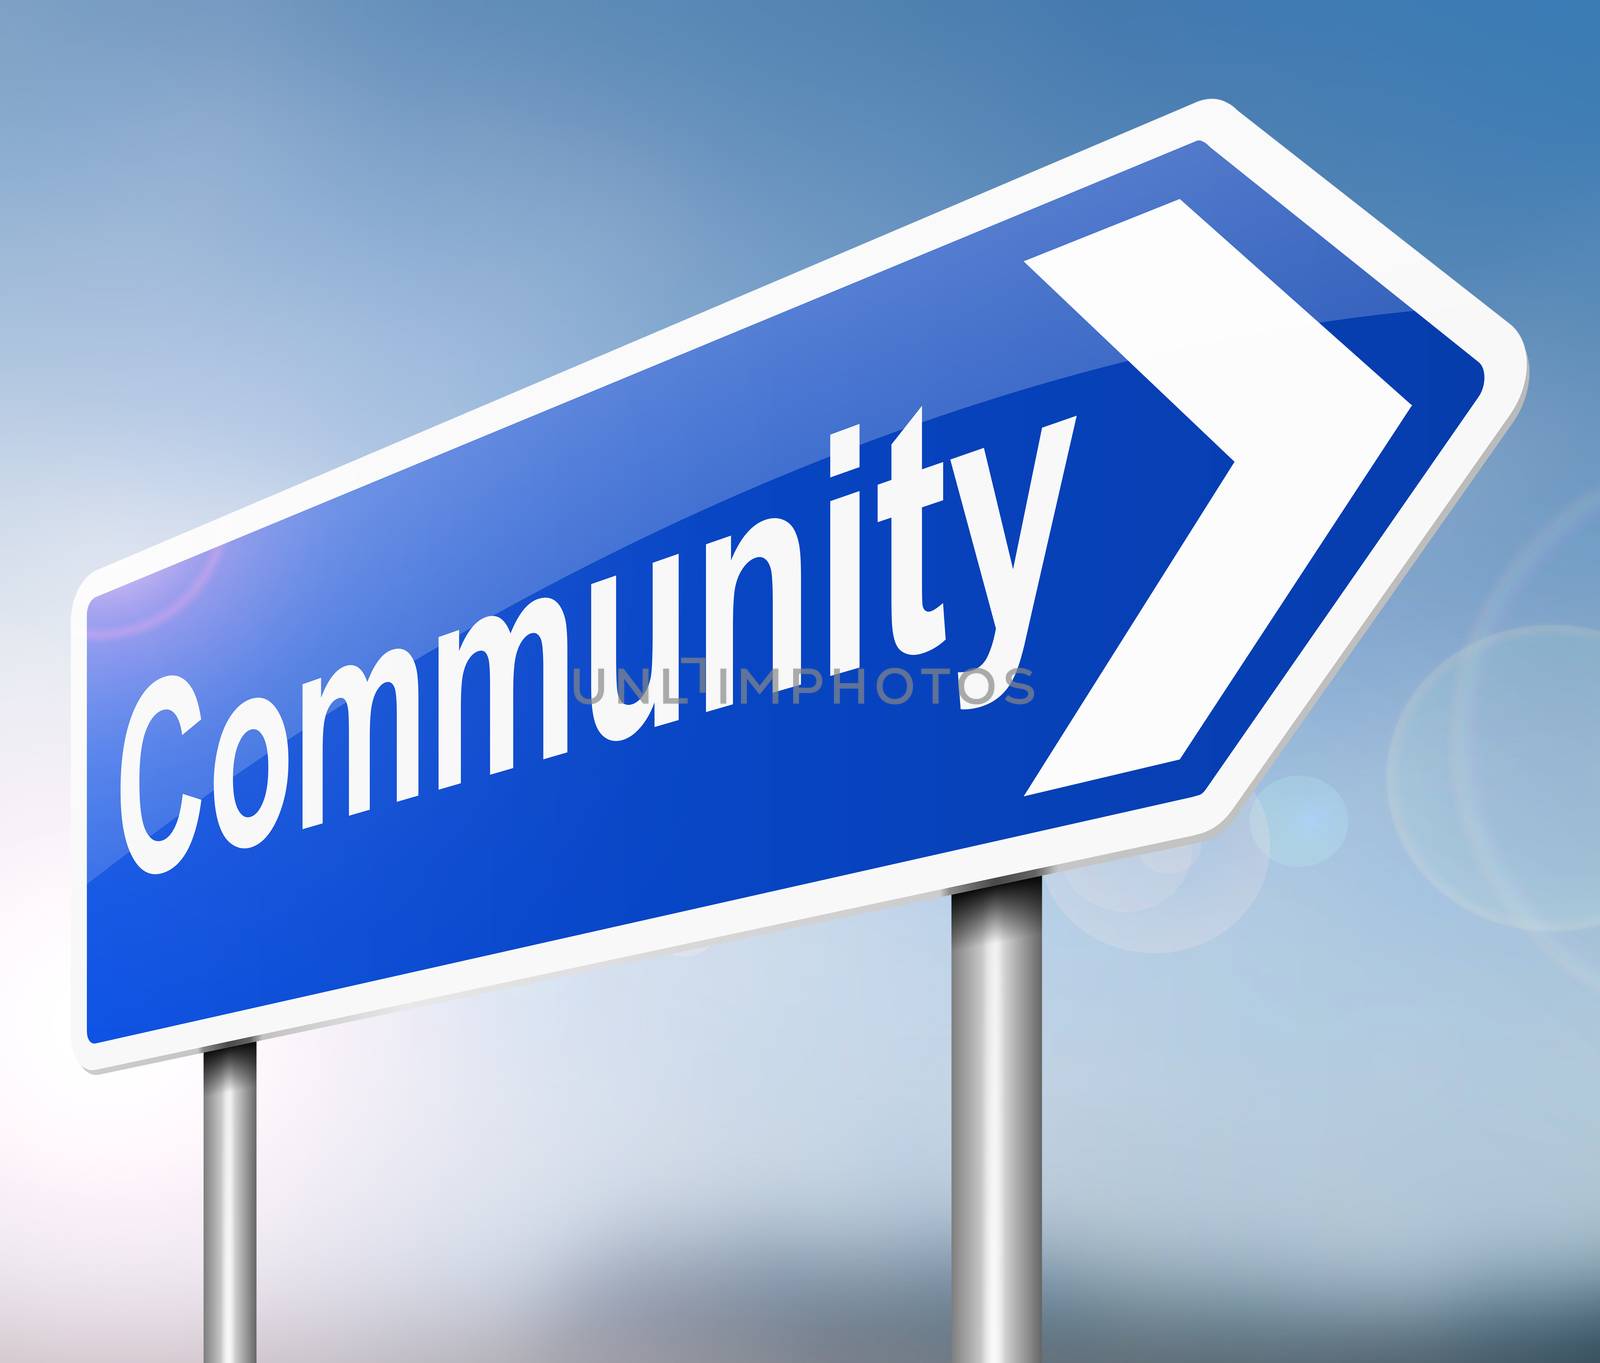 Illustration depicting a sign with a community concept.